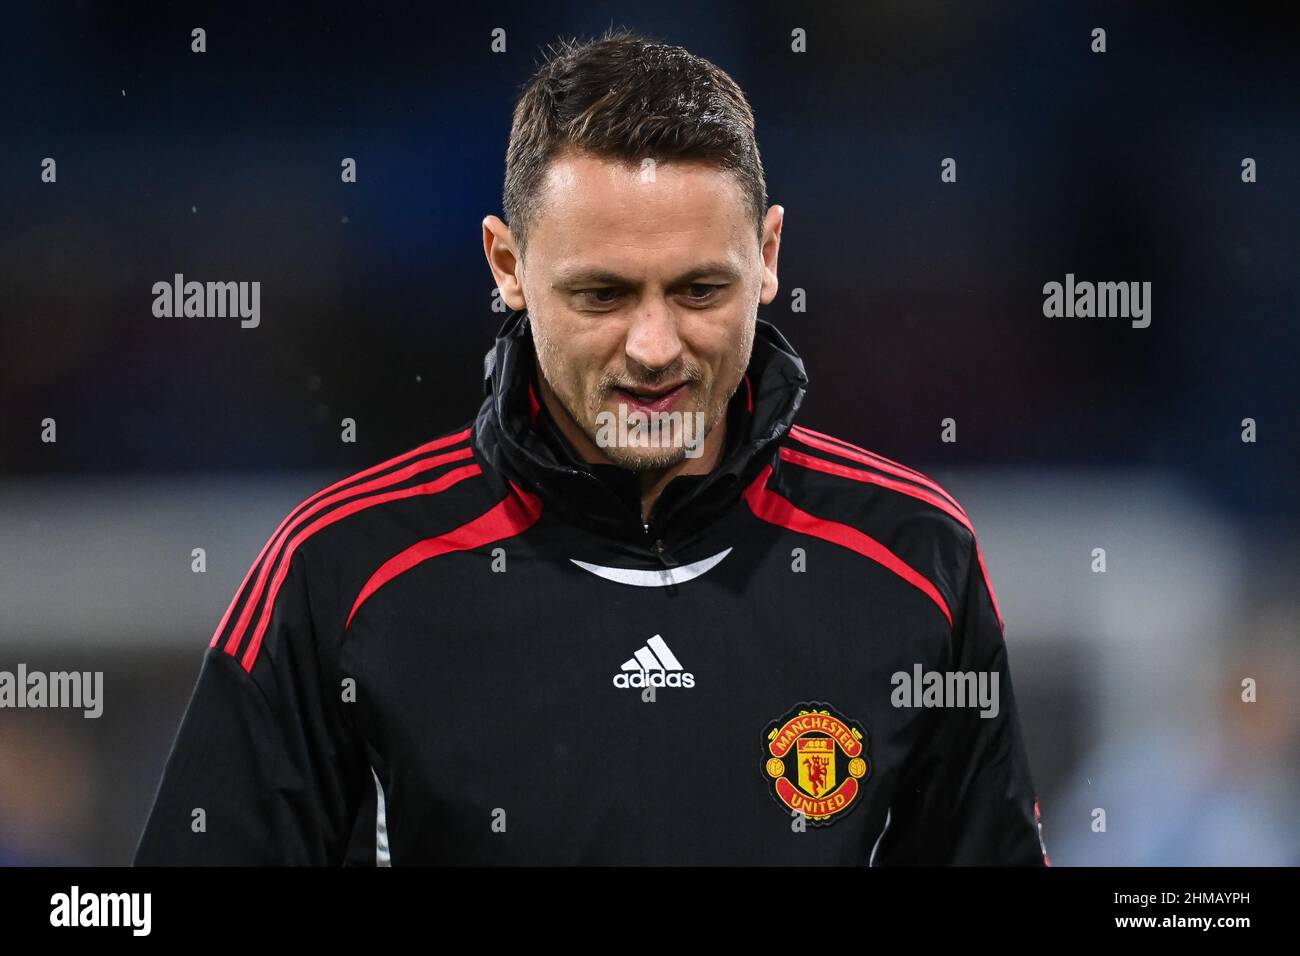 Nemanja Matic #31 of Manchester United during the pre-game warmup Stock Photo